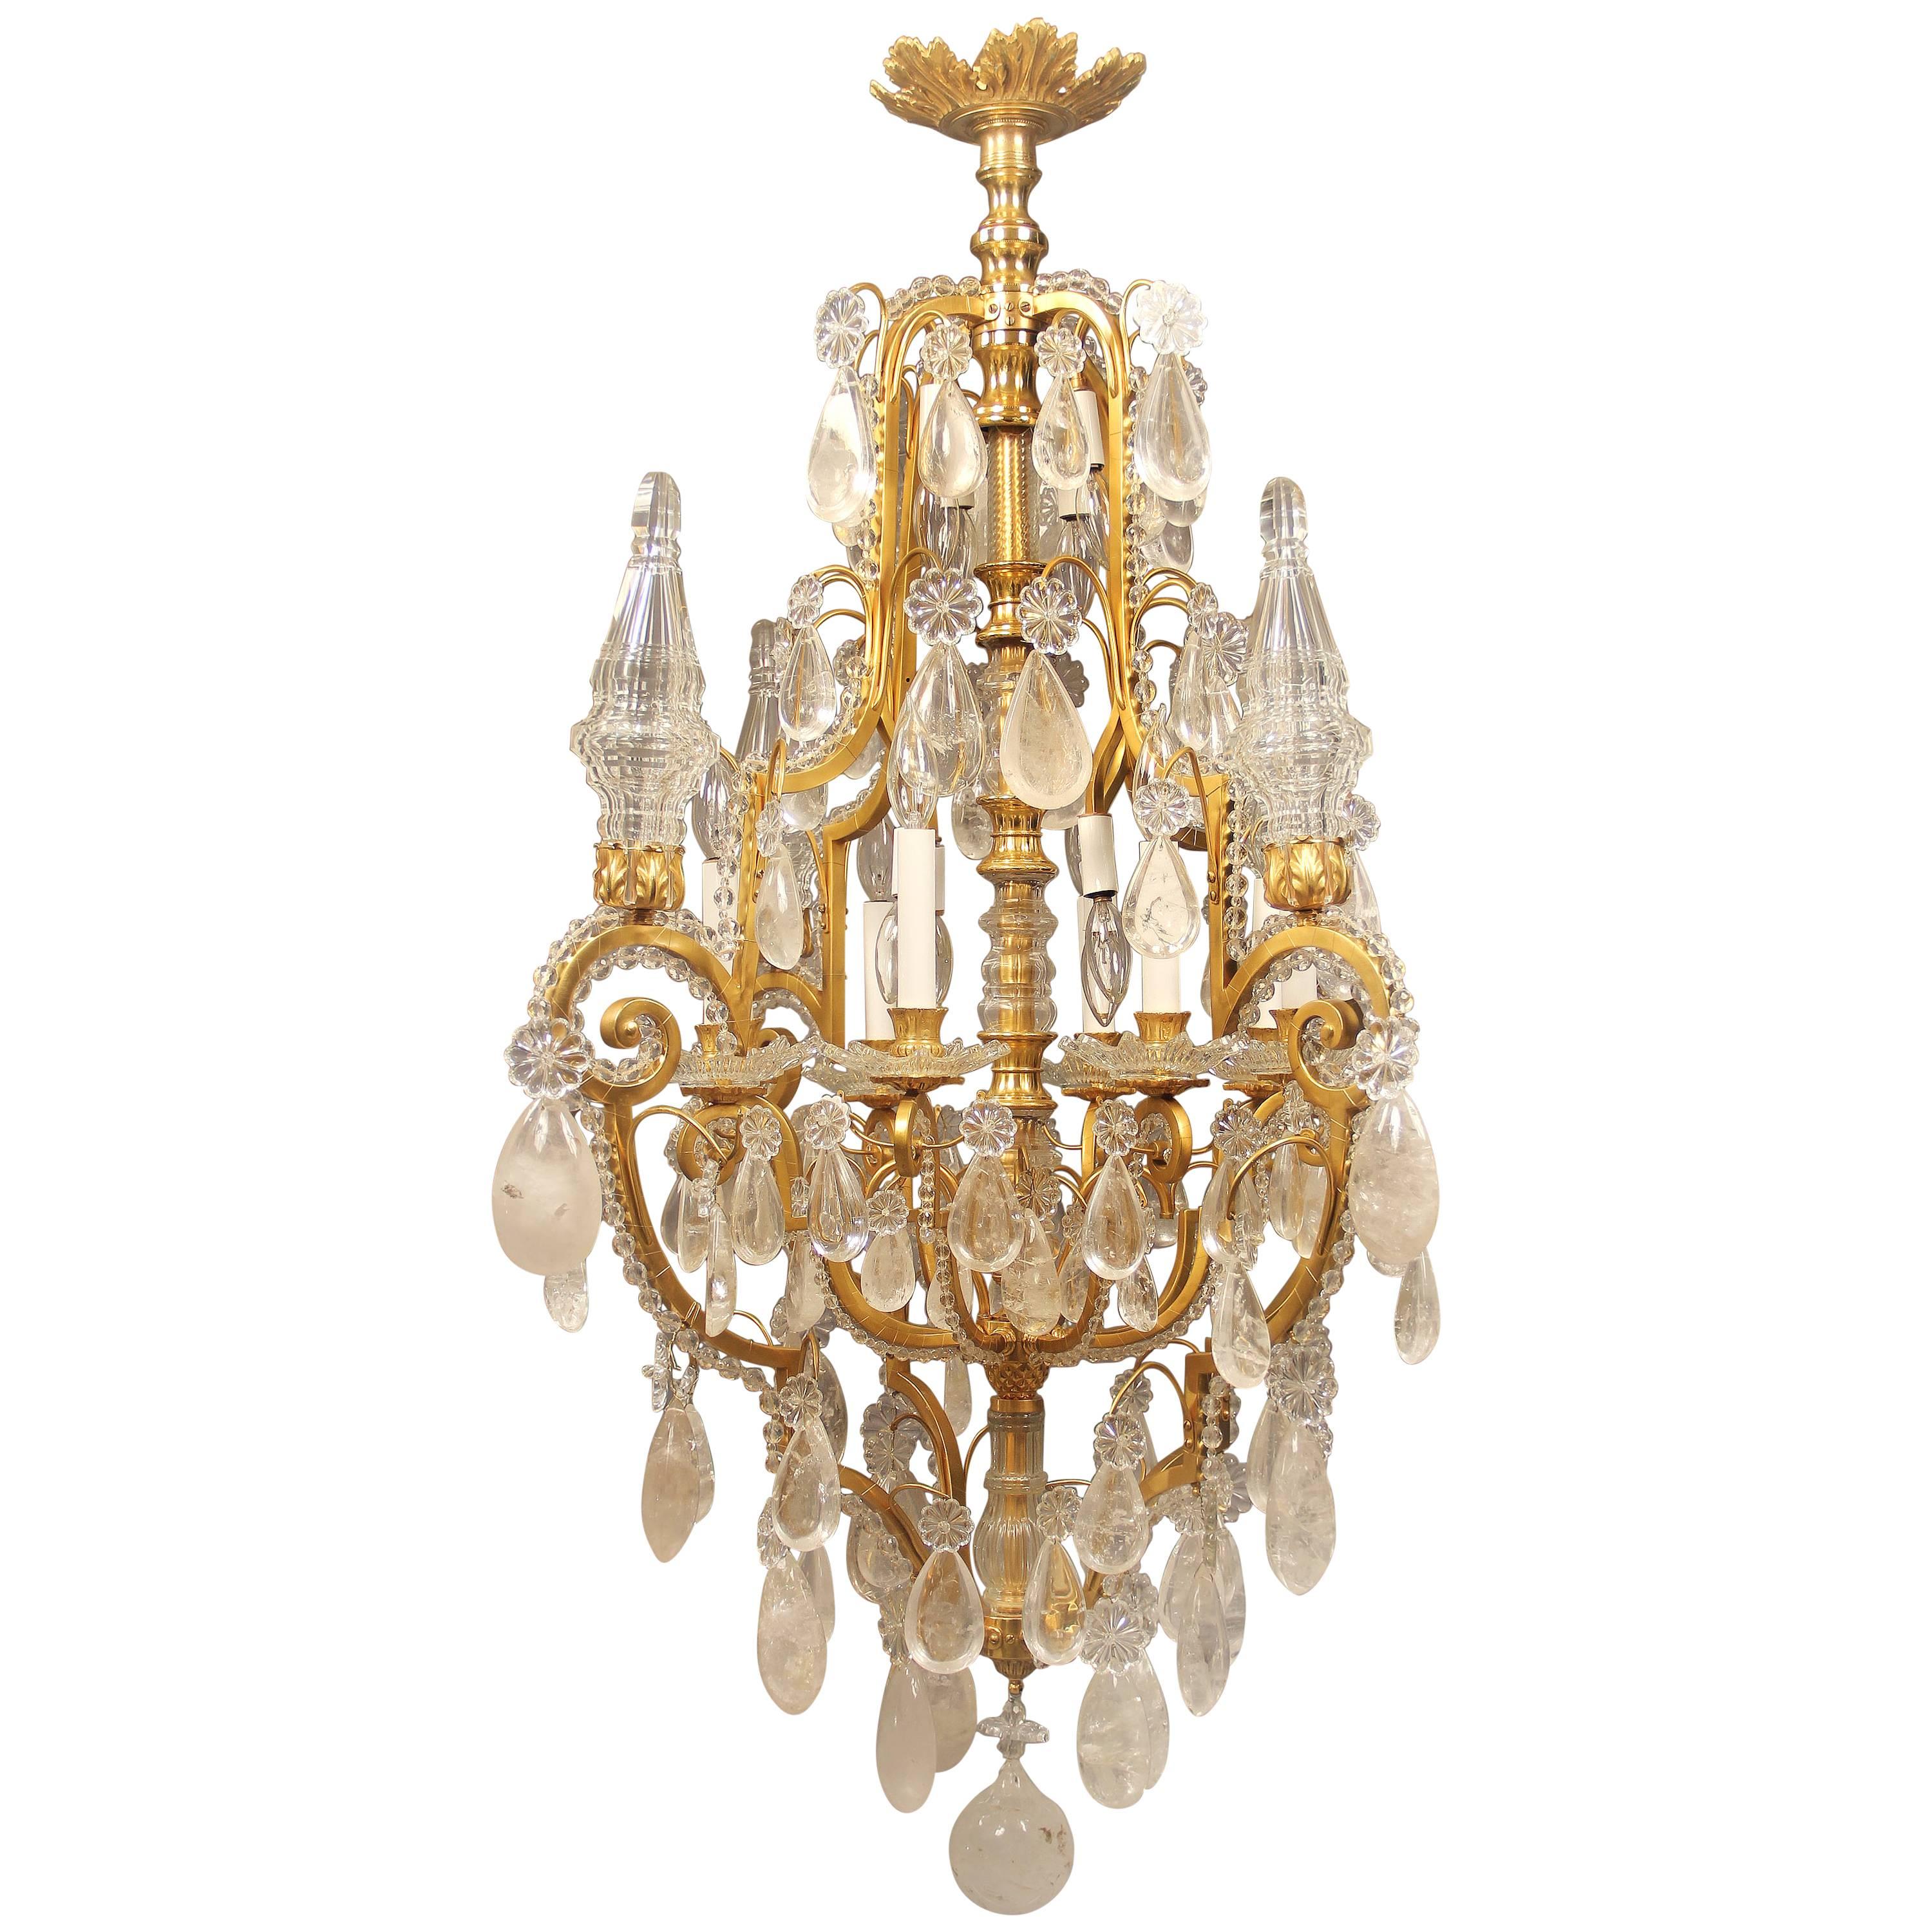 Fantastic Early 20th Century Gilt Bronze and Rock Crystal Chandelier For Sale